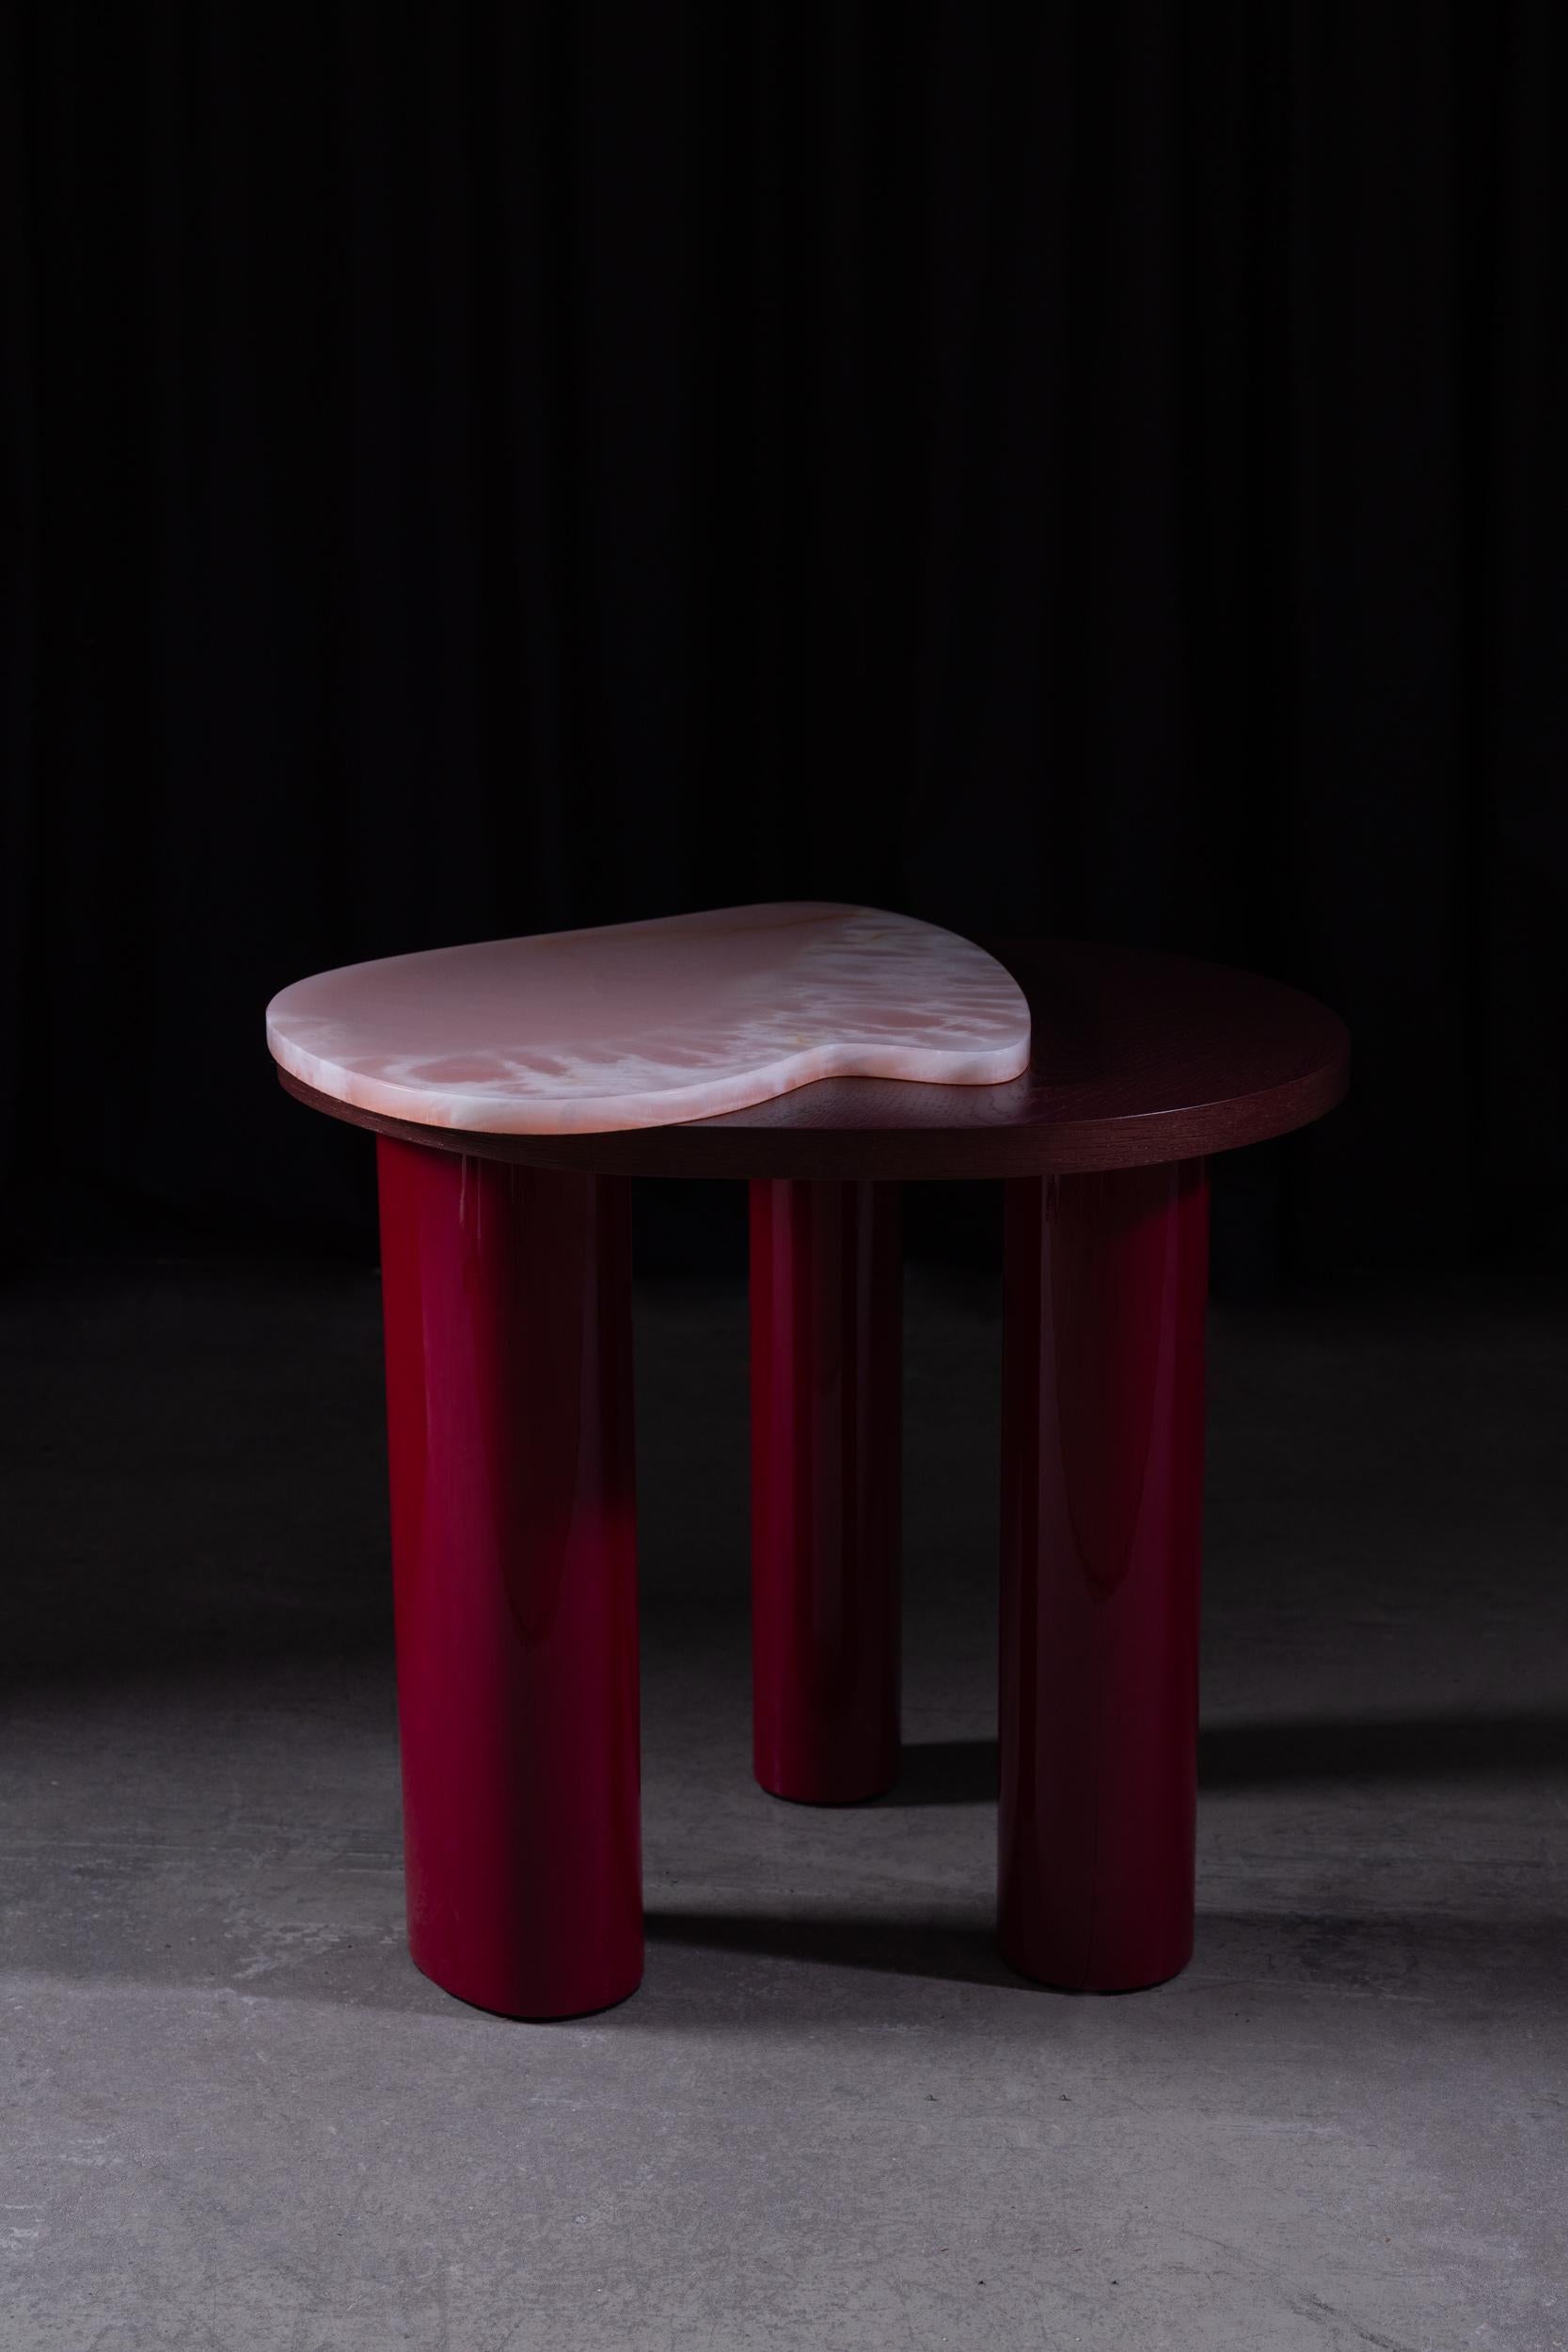 Hand-Crafted Organic Modern Bordeira Side Table, Pink Onyx, Handmade Portugal by Greenapple For Sale